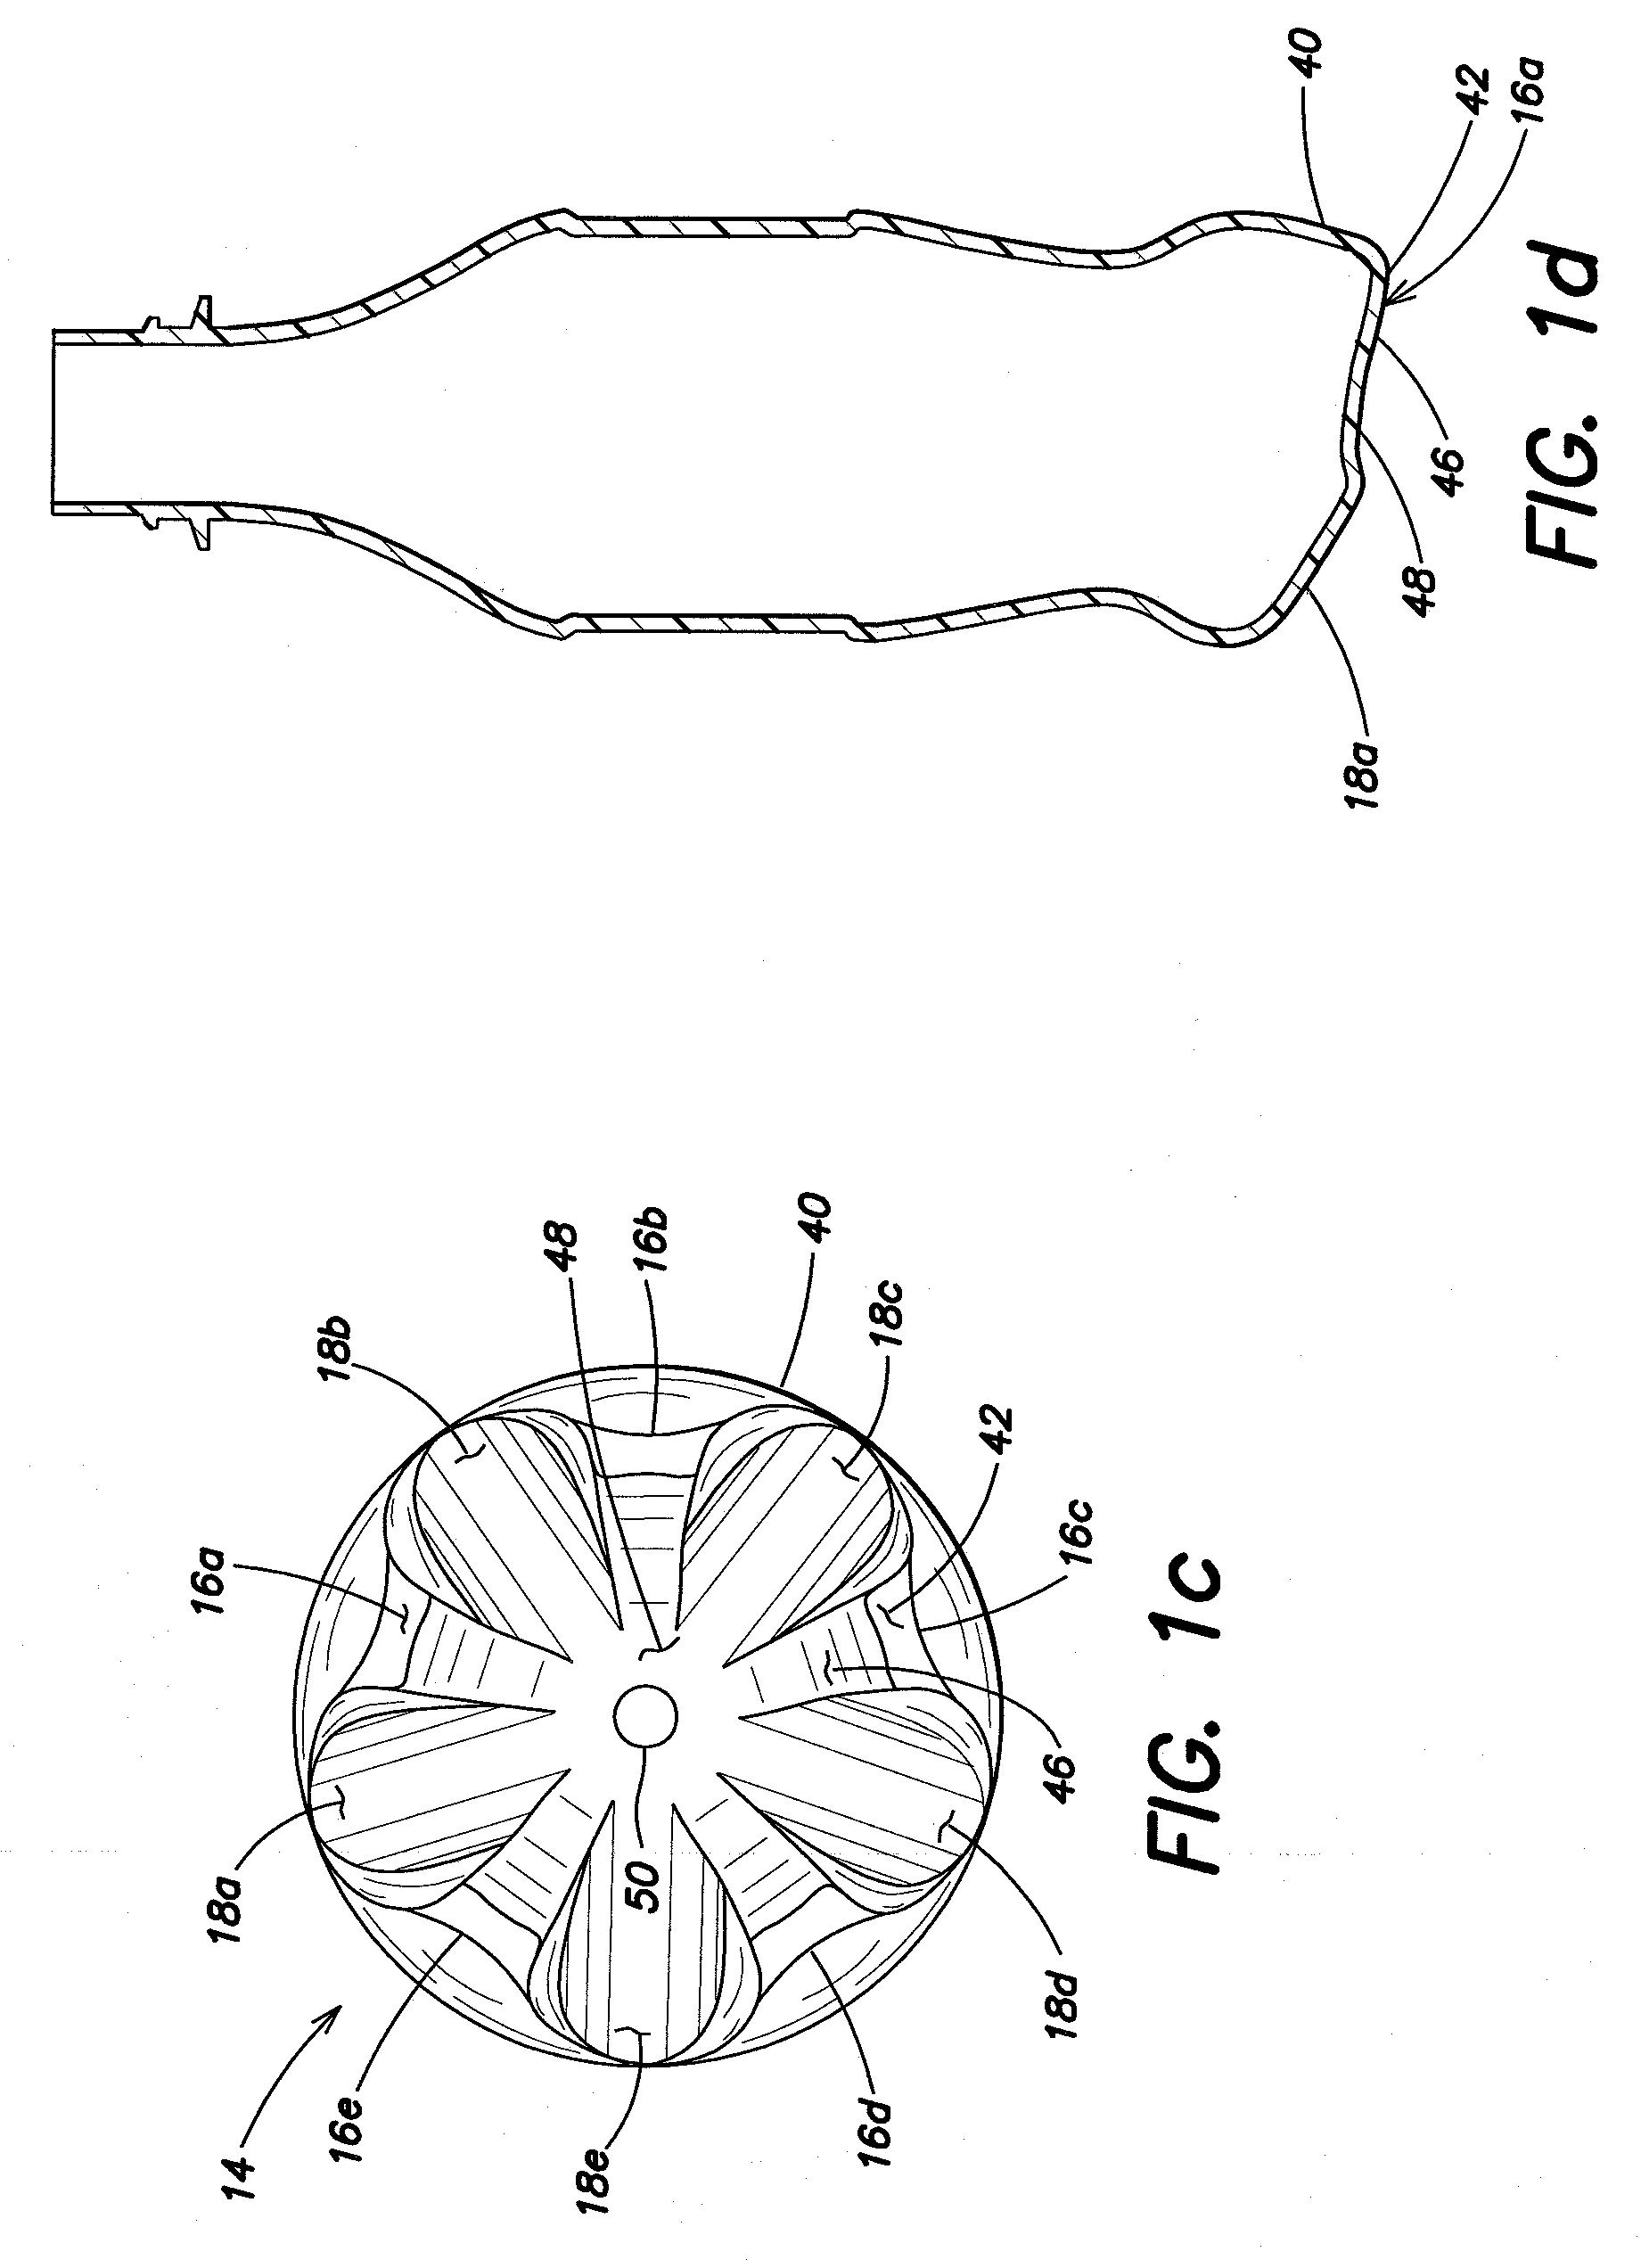 Preform Base and Method of Making a Delamination and Crack Resistant Multilayer Container Base